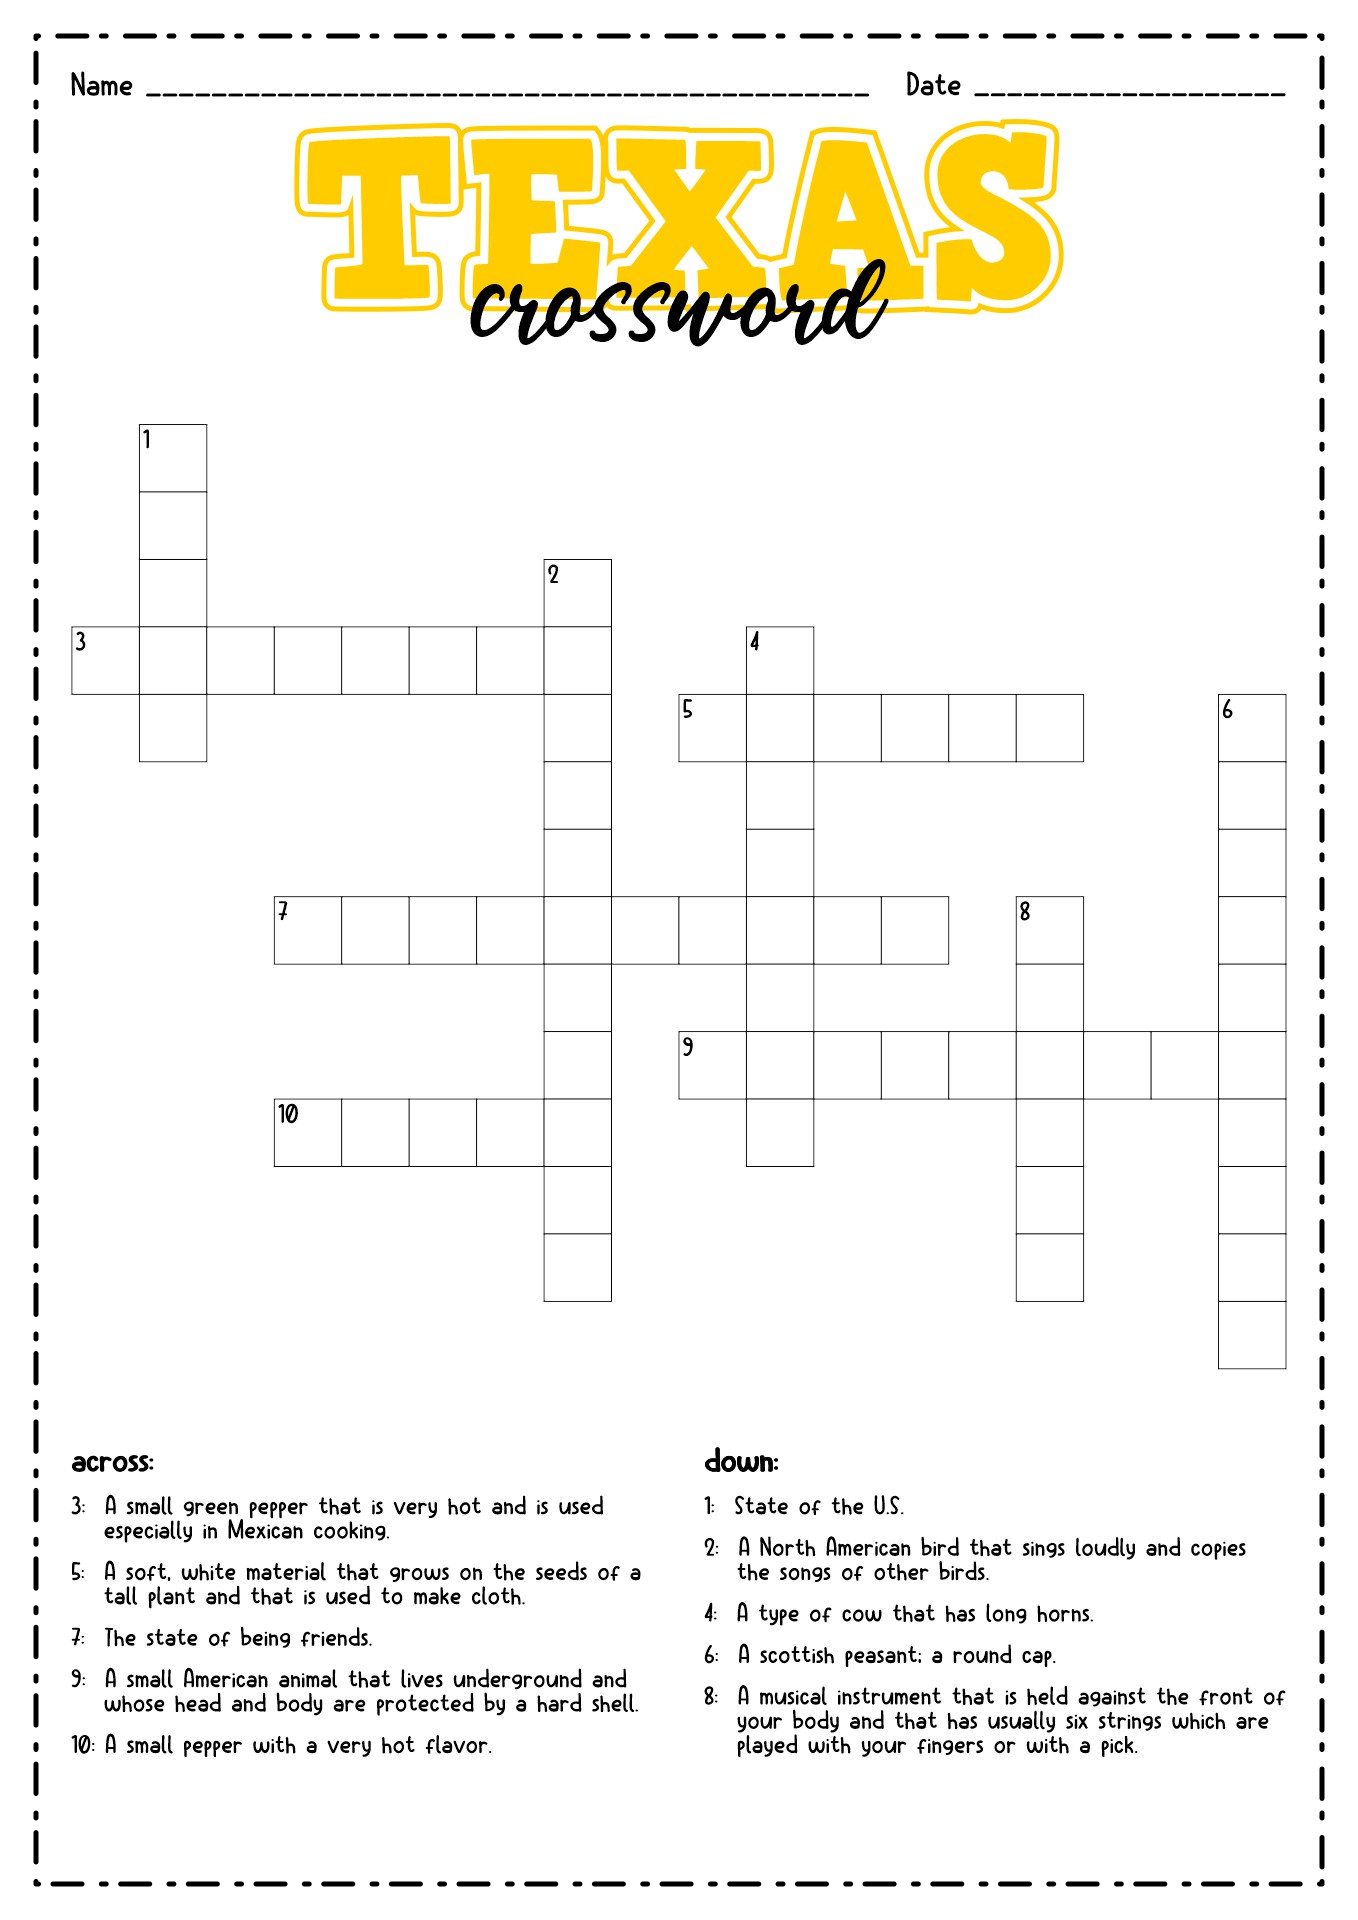 7 Images of Free Printable History Worksheets